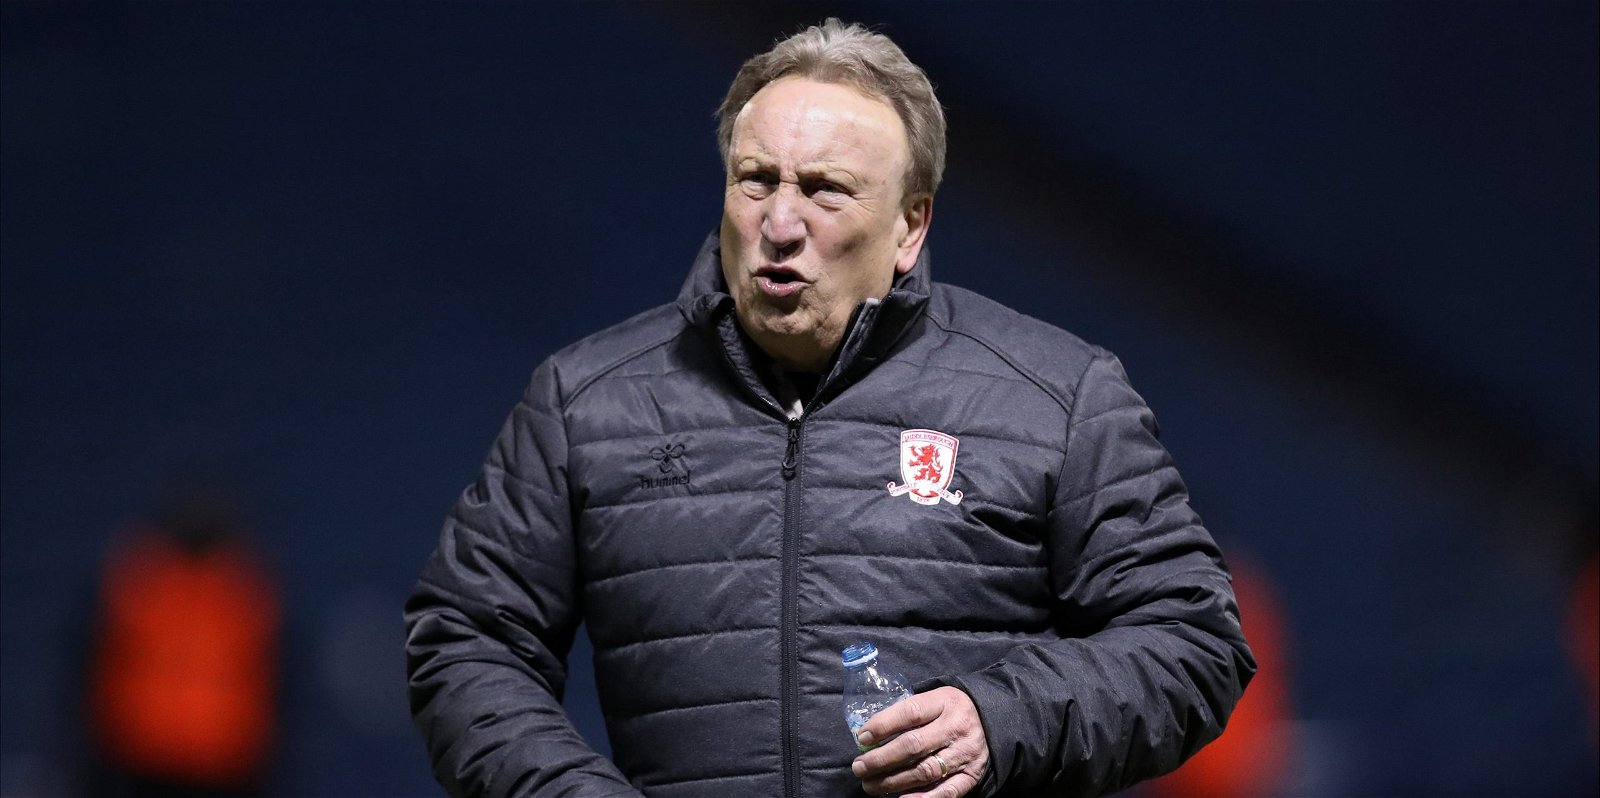 Neil Warnock, 5 times EFL managers lashed out &#8211; Jolley&#8217;s Grimsby Town tirade, Di Canio v Foderingham at Swindon Town and more